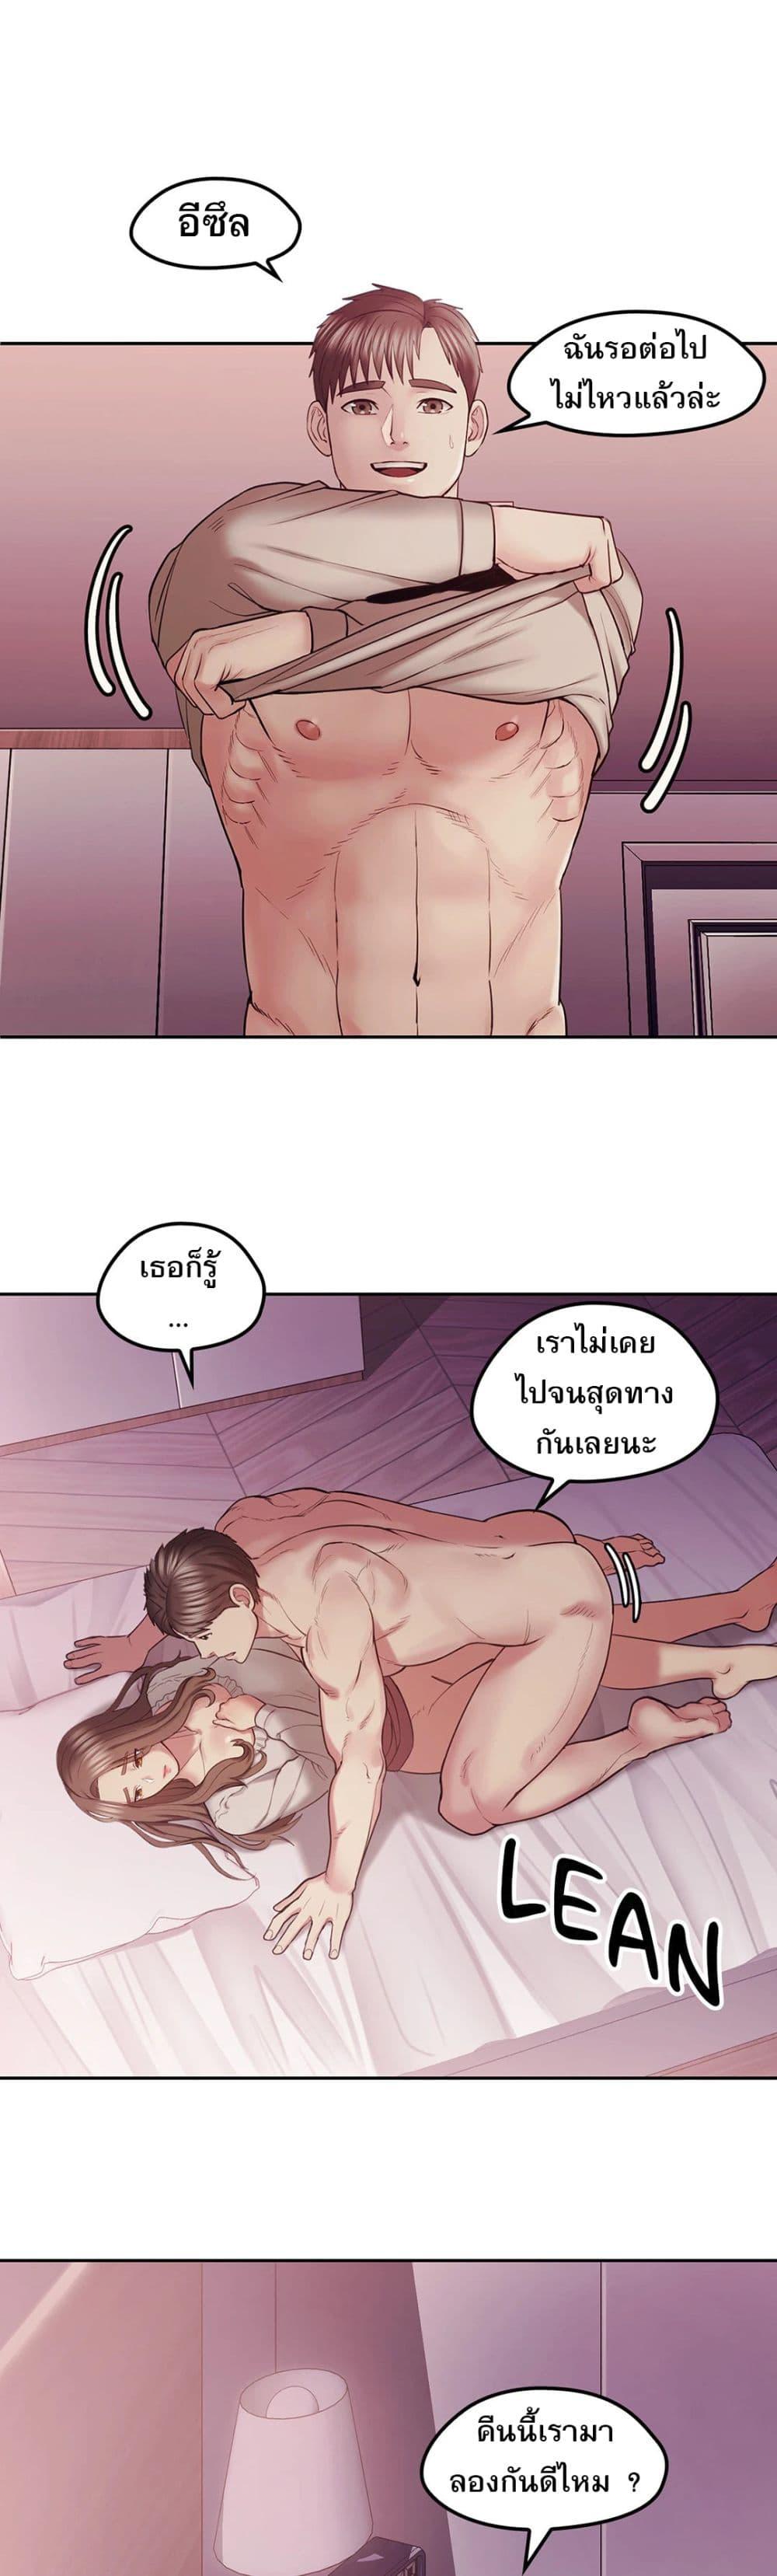 Sexual Consulting 1 ภาพ 31